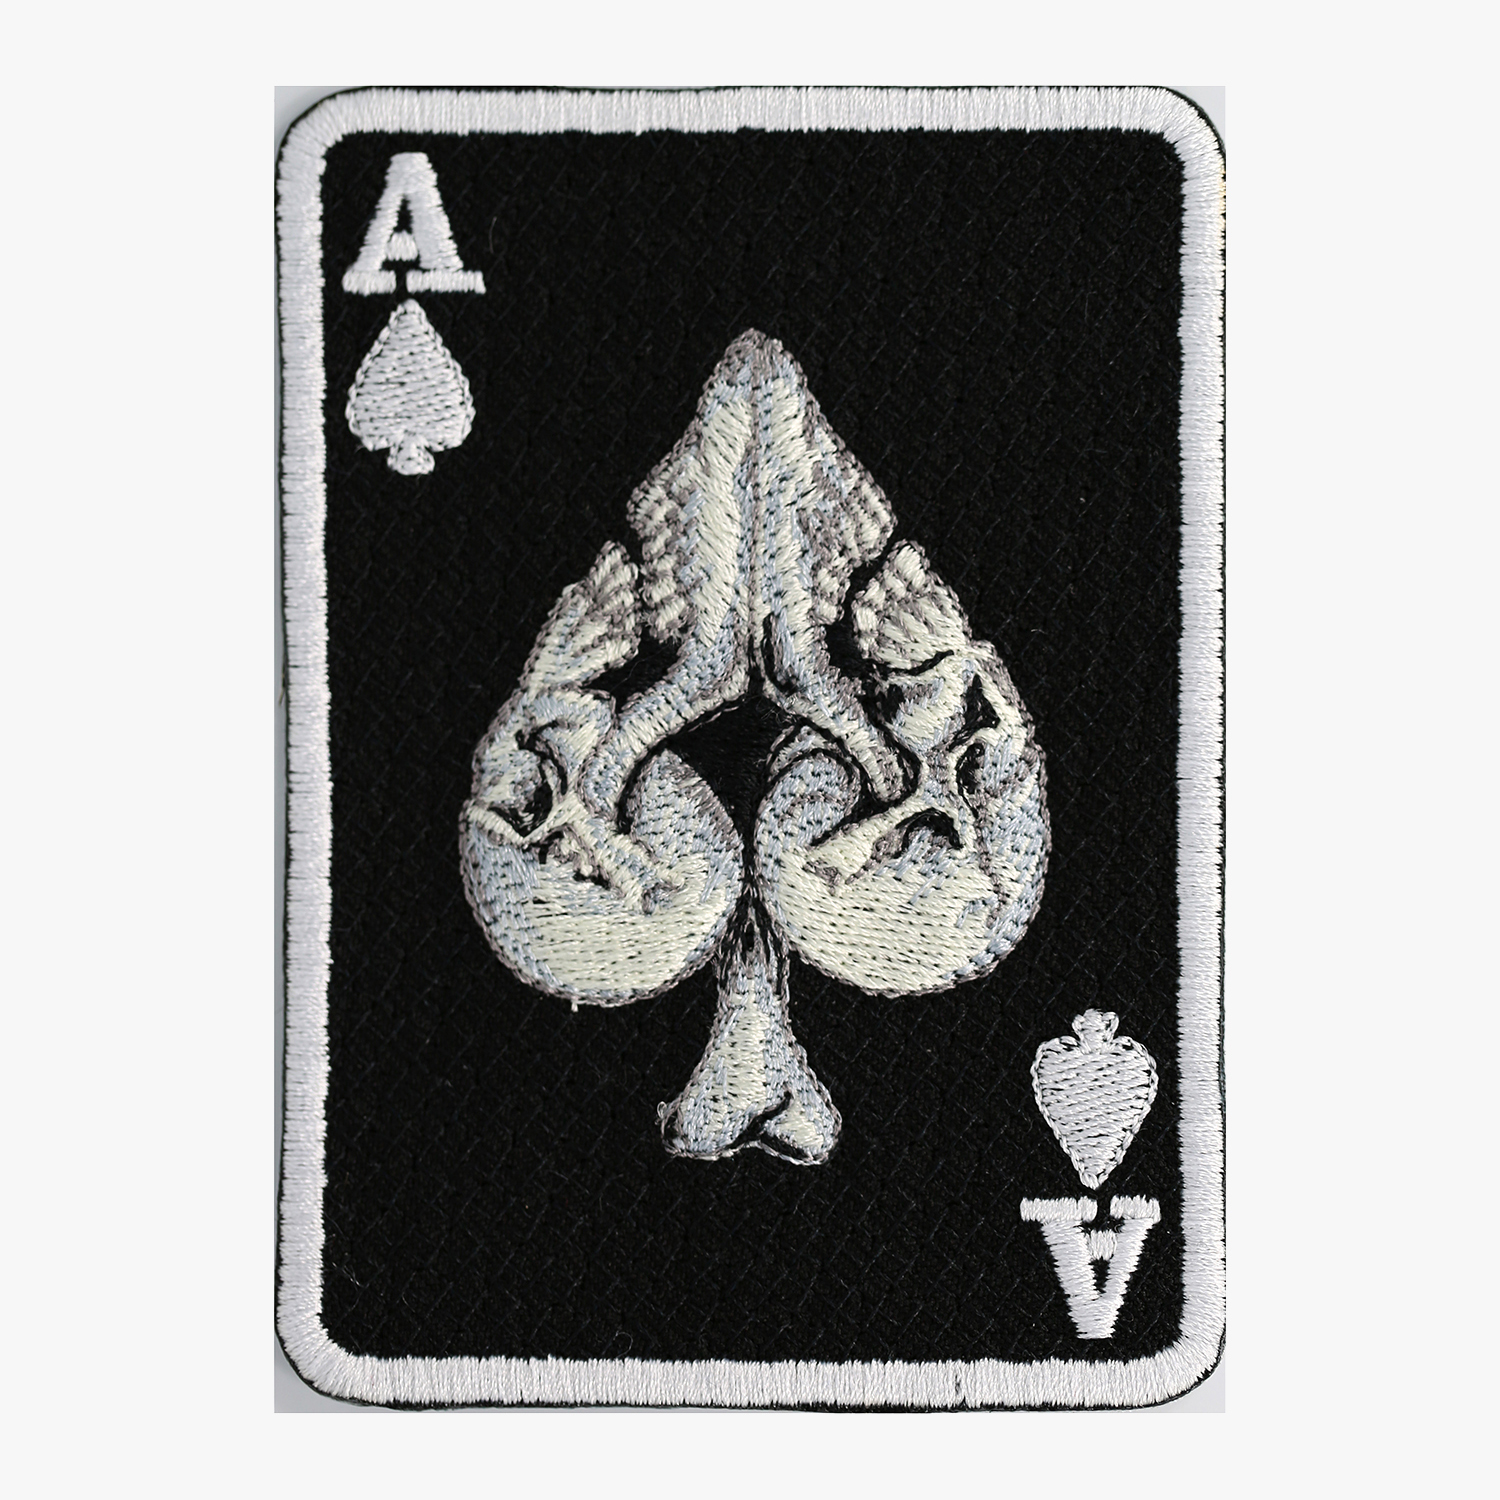 ACE of SPADE SKULL BIKER EMBROIDERY PATCH